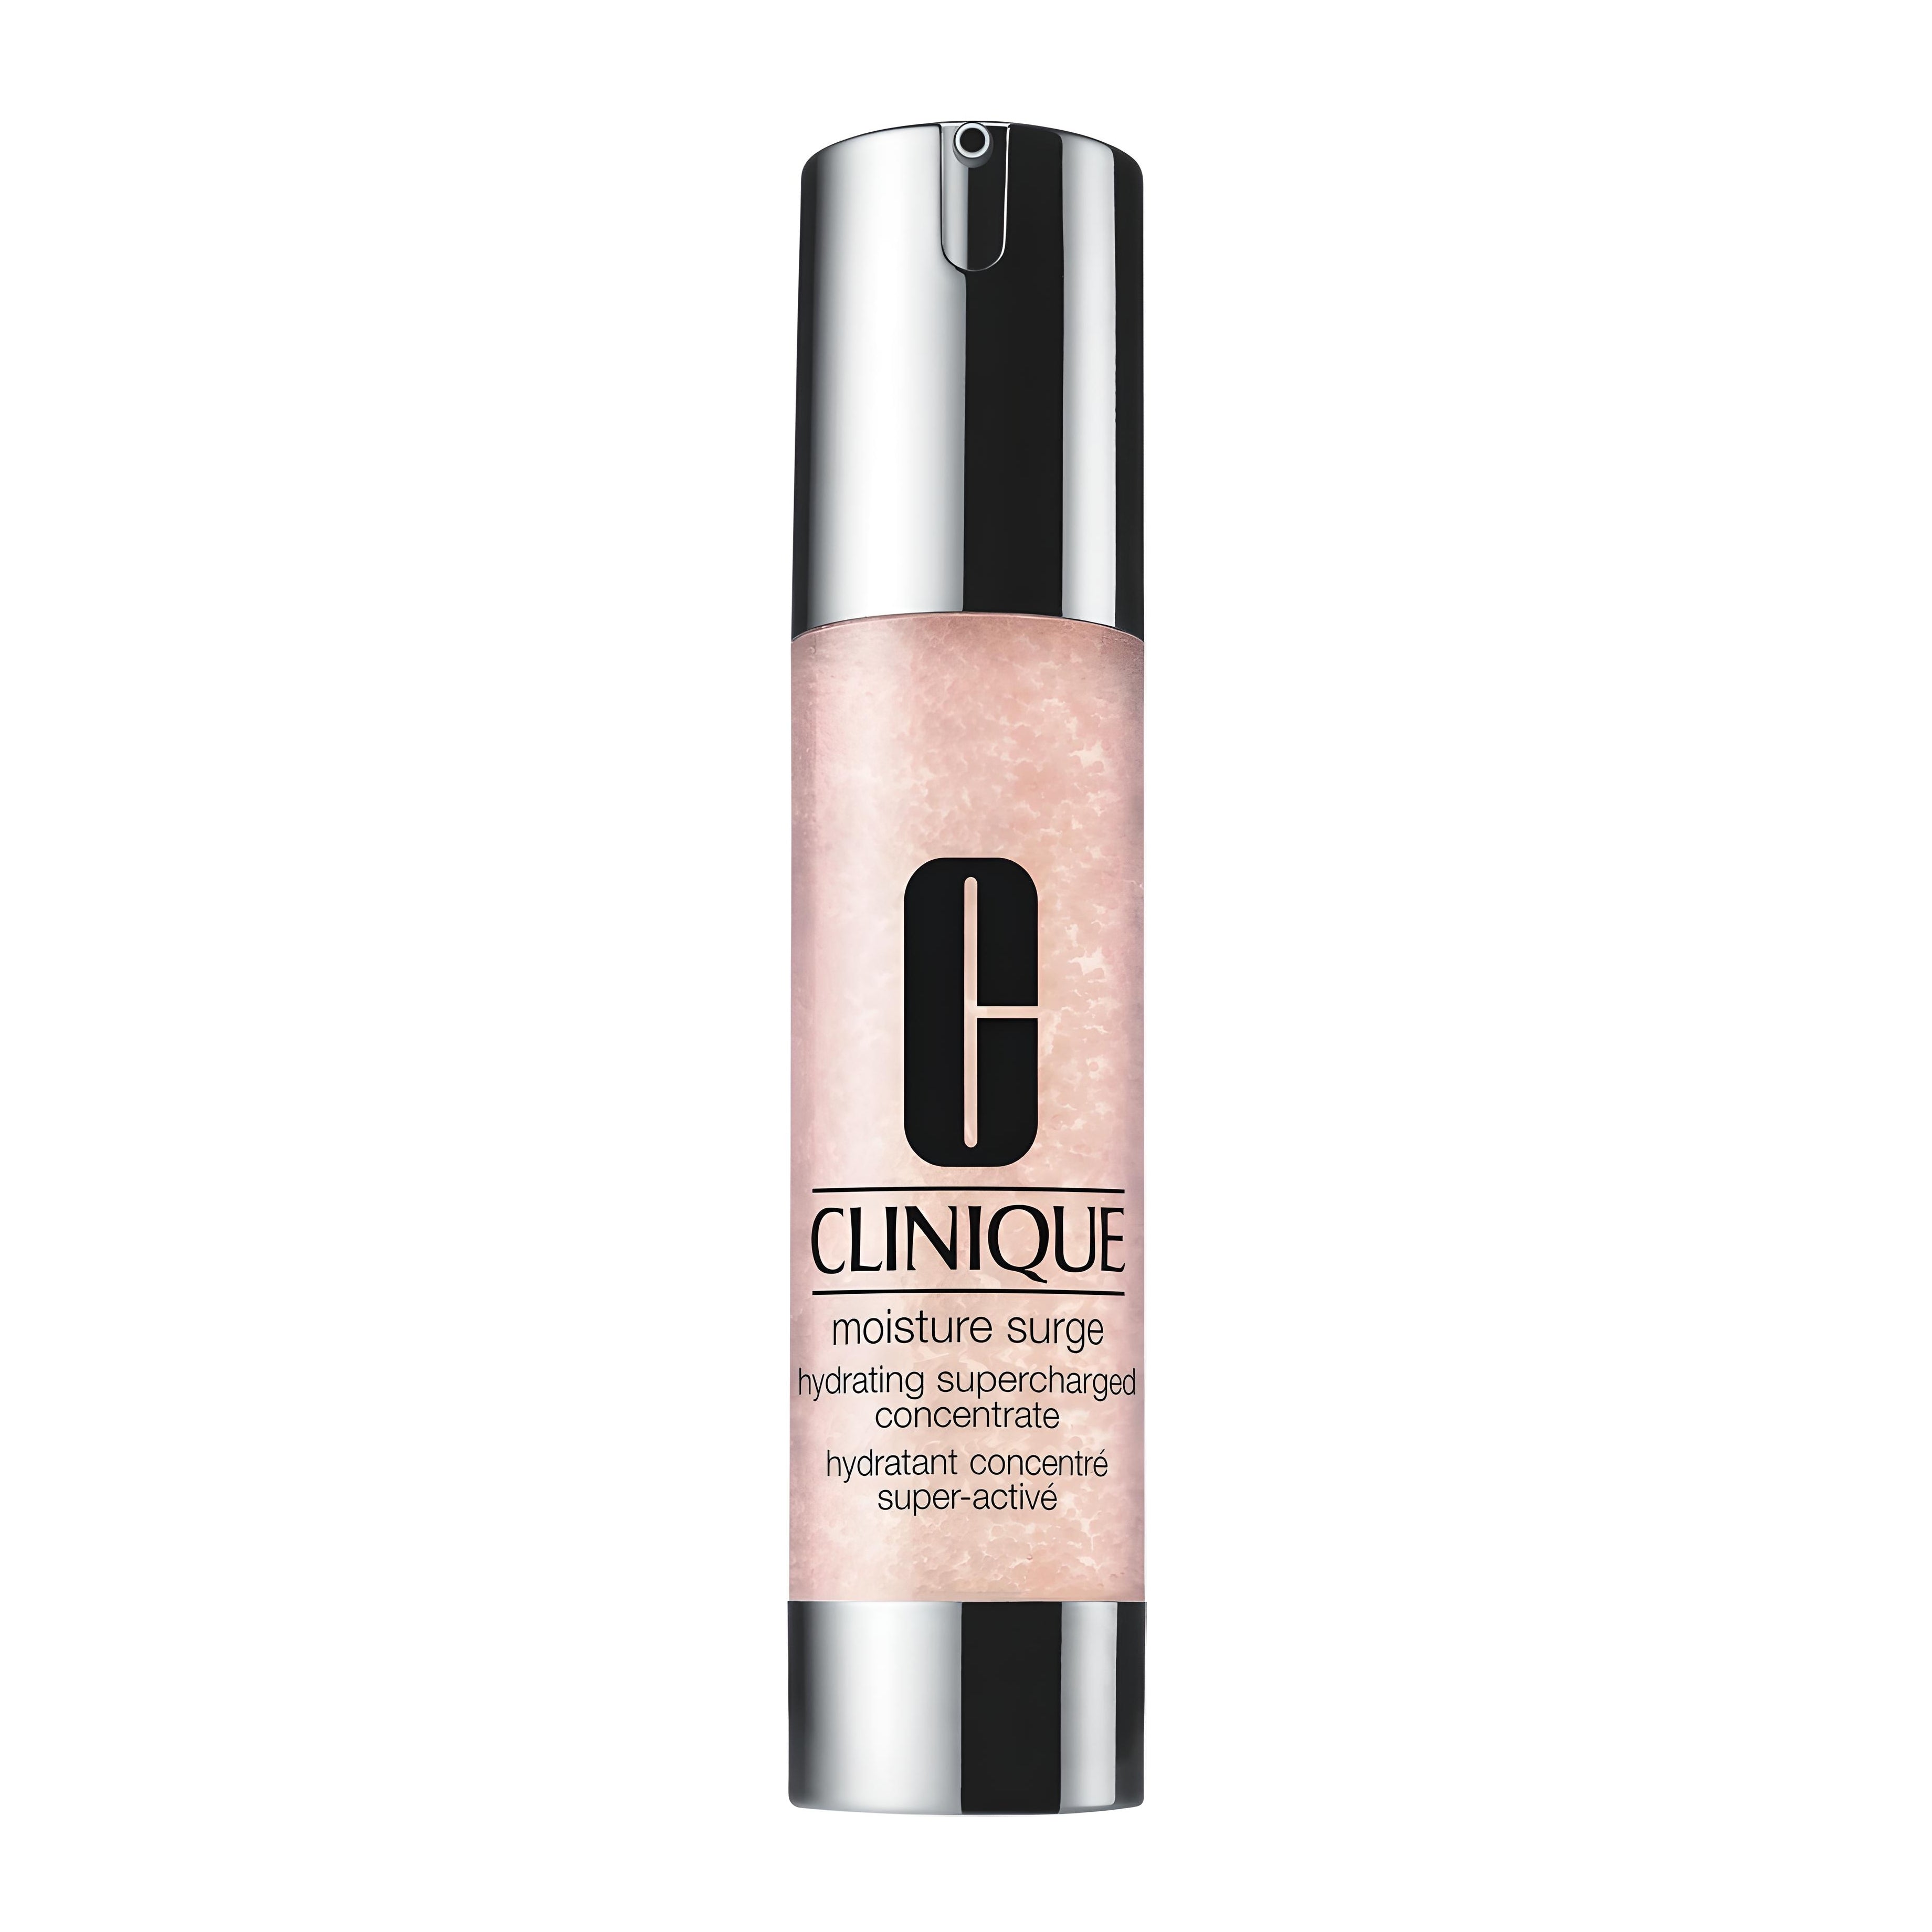 MOISTURE SURGE hydrating supercharged concentrate Gesichtspflege CLINIQUE   